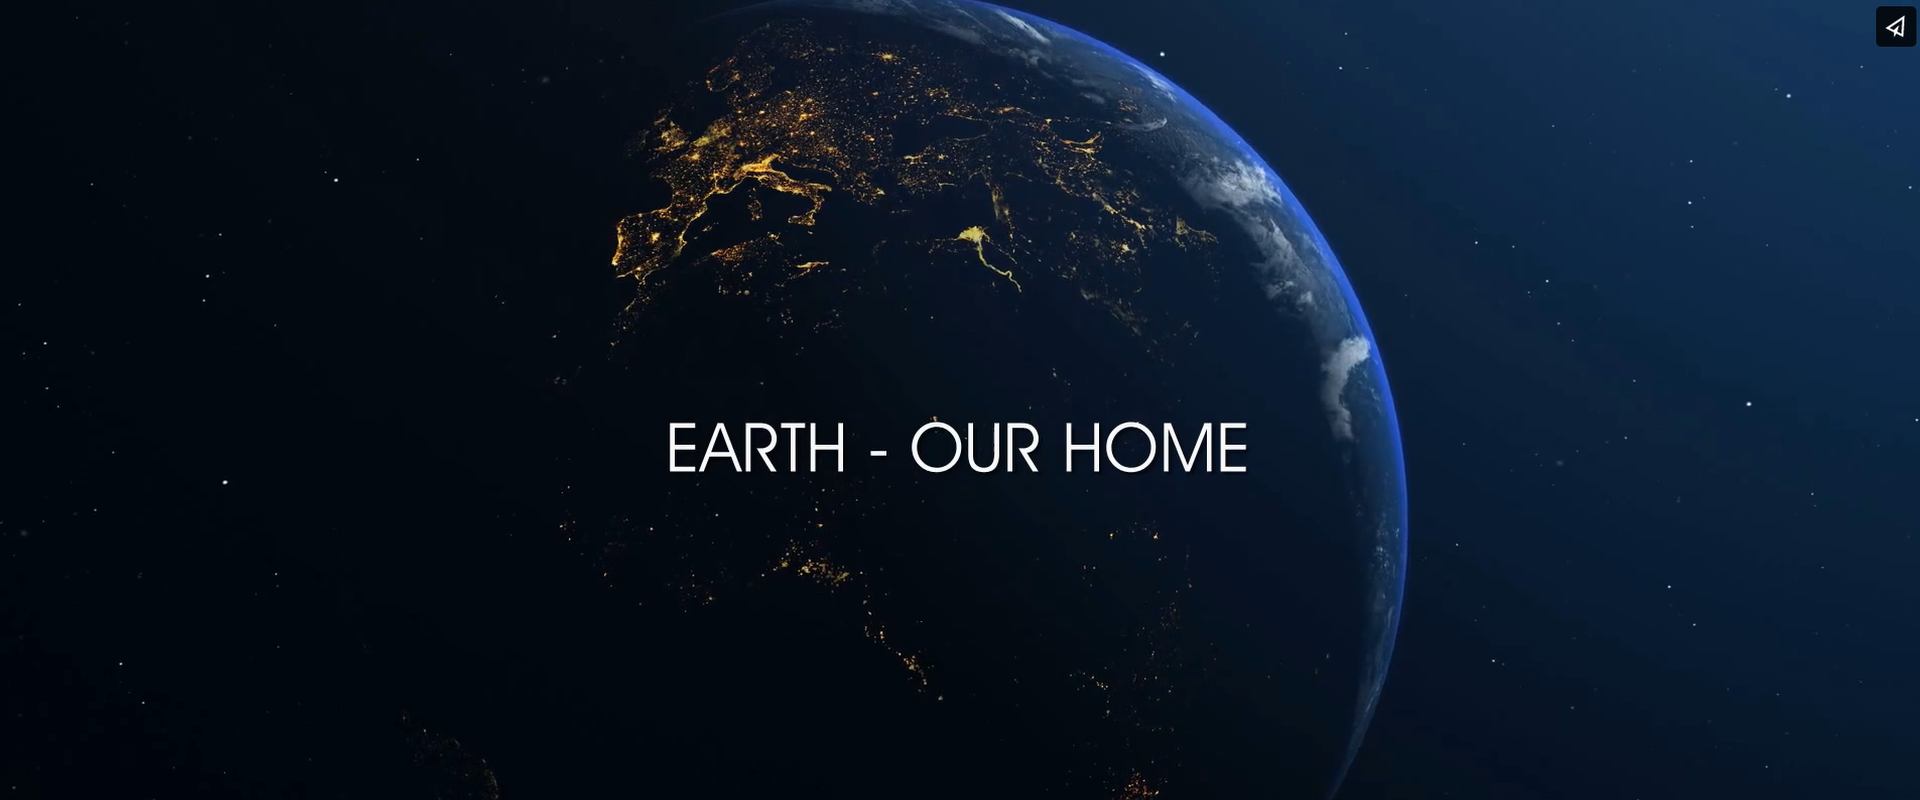 Earth - our home